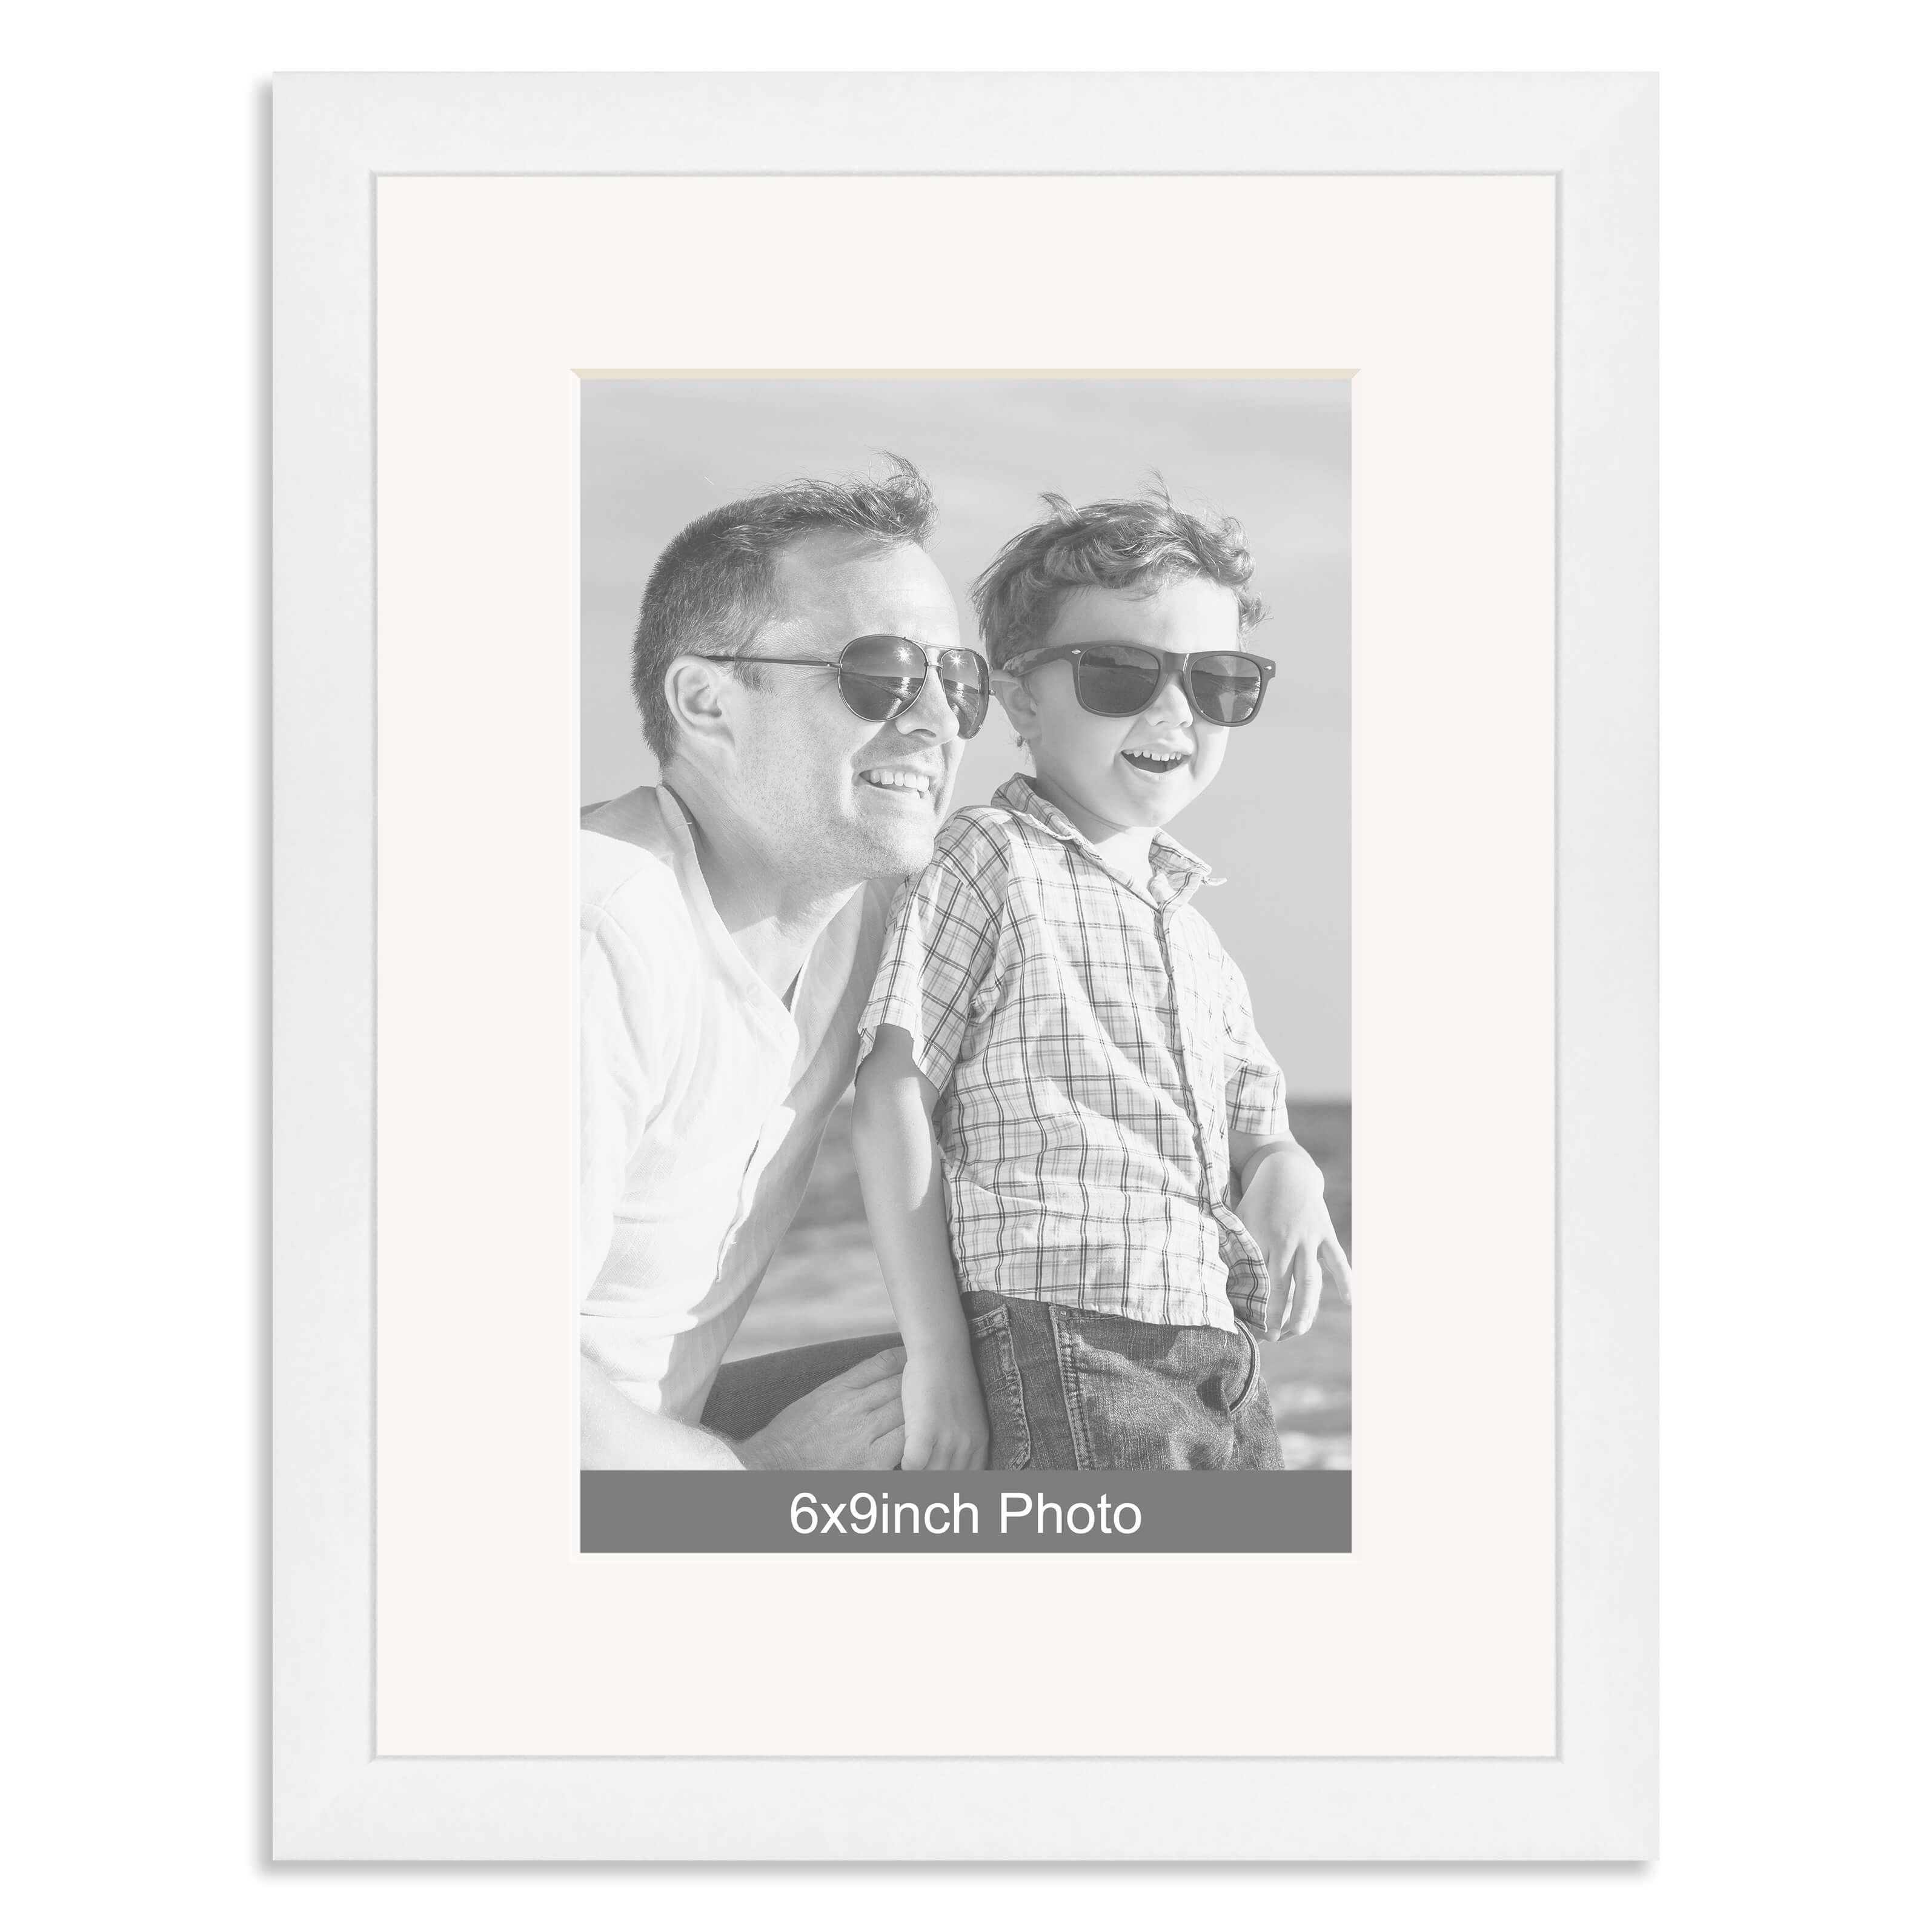 White Wooden Photo Frame with mount for a 9×6/6x9in Photo – Photo to follow by email